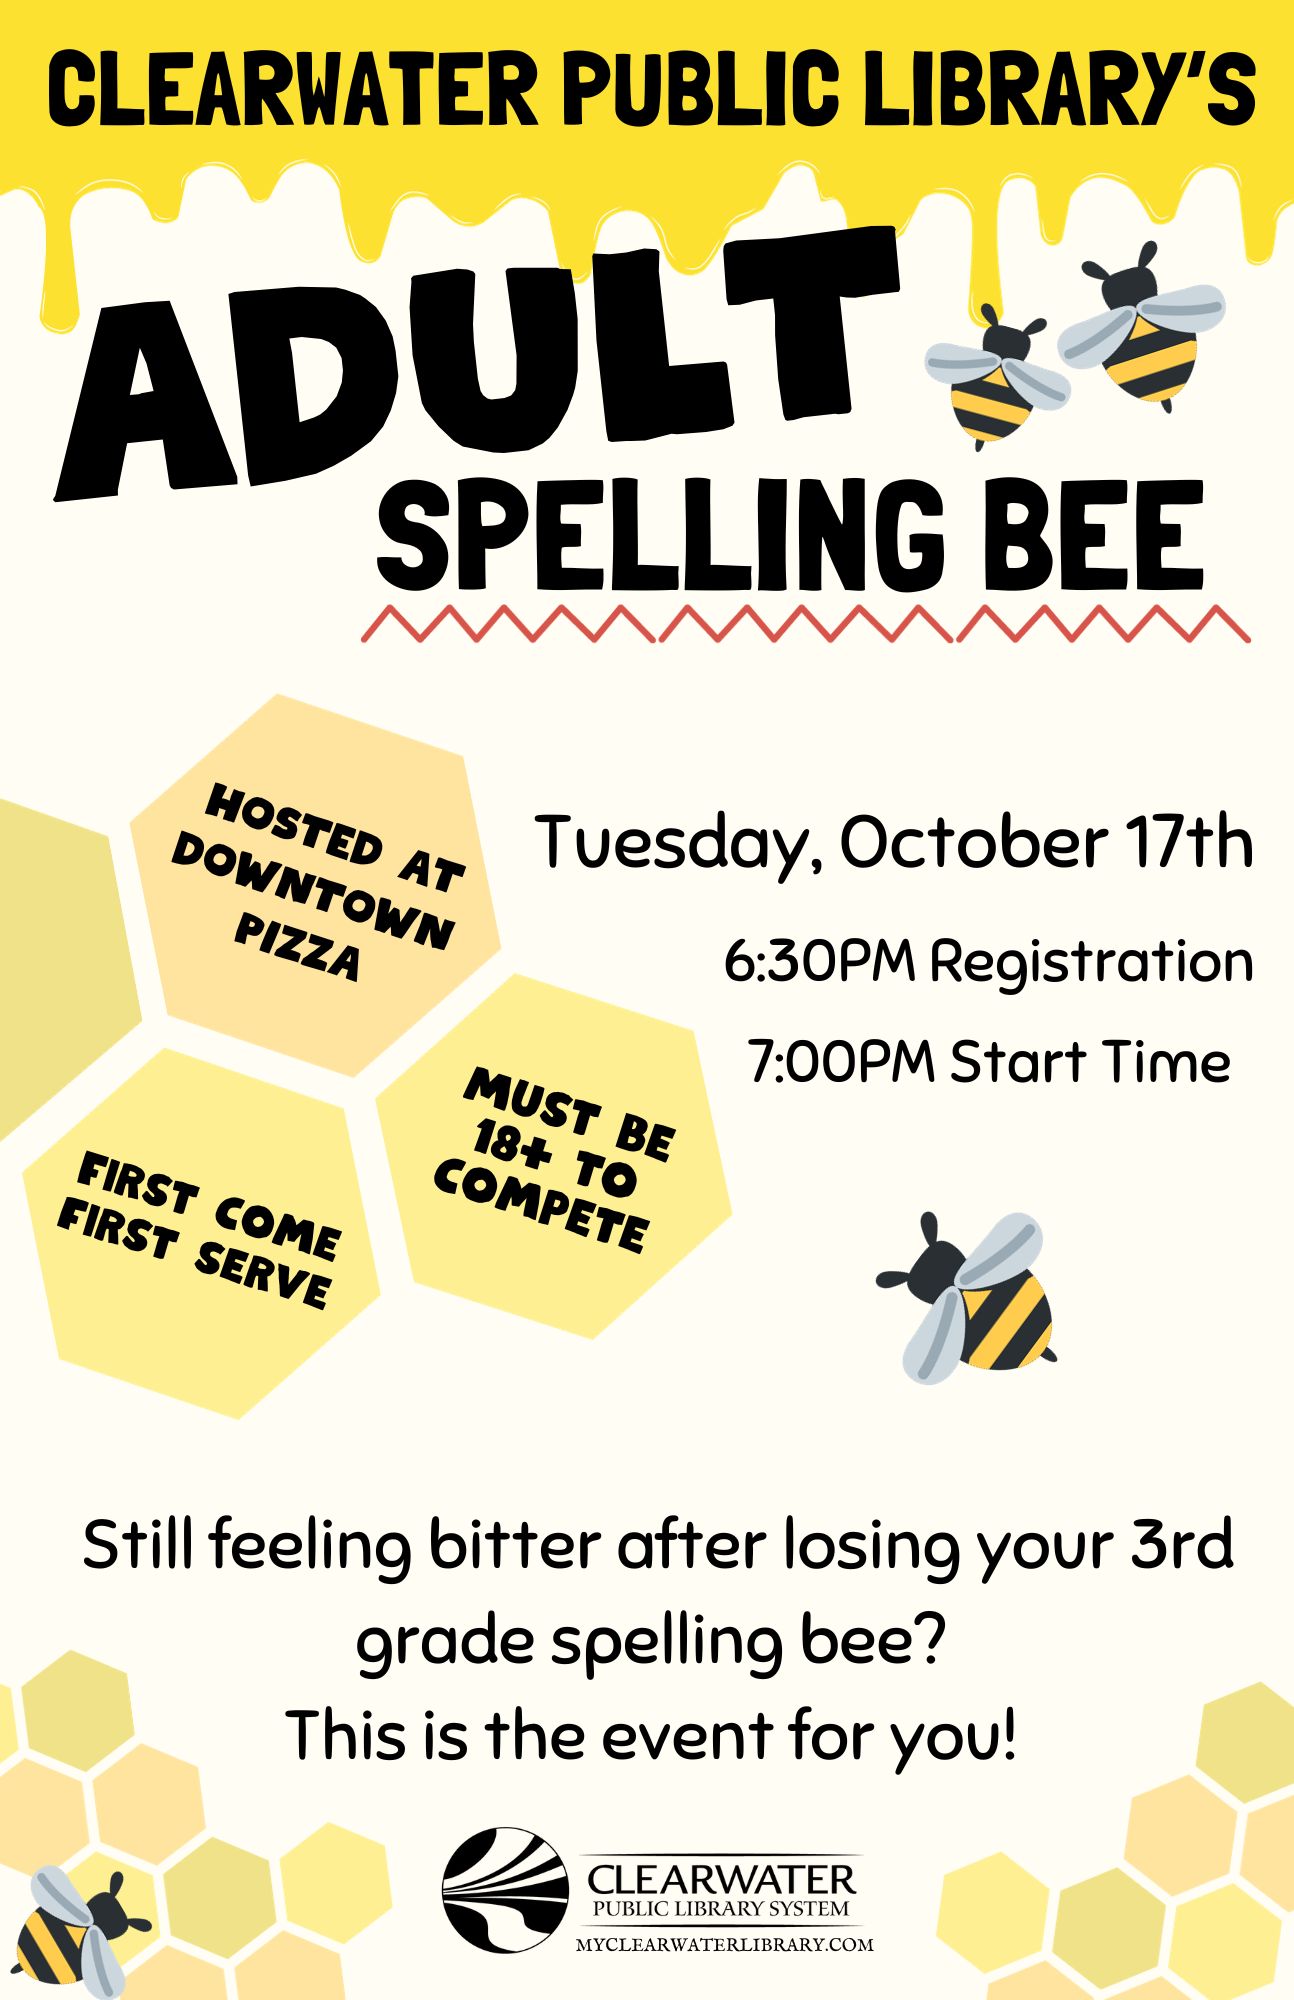 Bee themed poster including event details. text reads: "Clearwater Public Library's Adult Spelling Bee; Hosted at Downtown Pizza; Must be 18+;First come, first serve; Tuesday, October 17th; 6:30PM Registration, 7:00PM Start Time;Still feeling bitter after losing your 3rd grade spelling bee? This is the event for you!" 